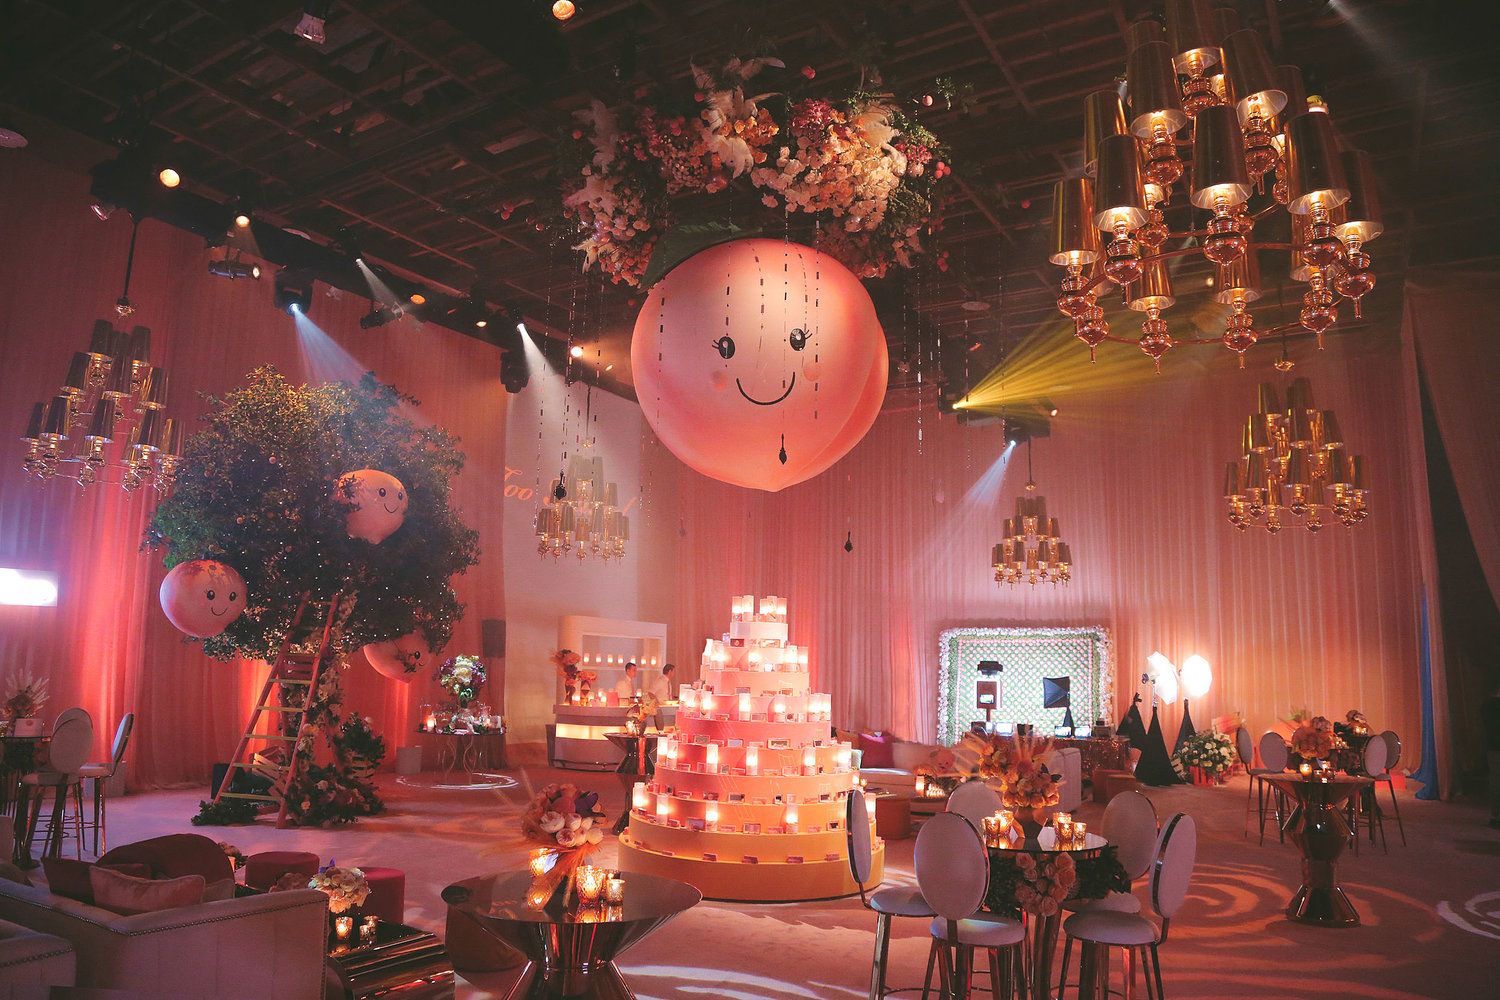 Too Faced Sweet Peach Corporate Event